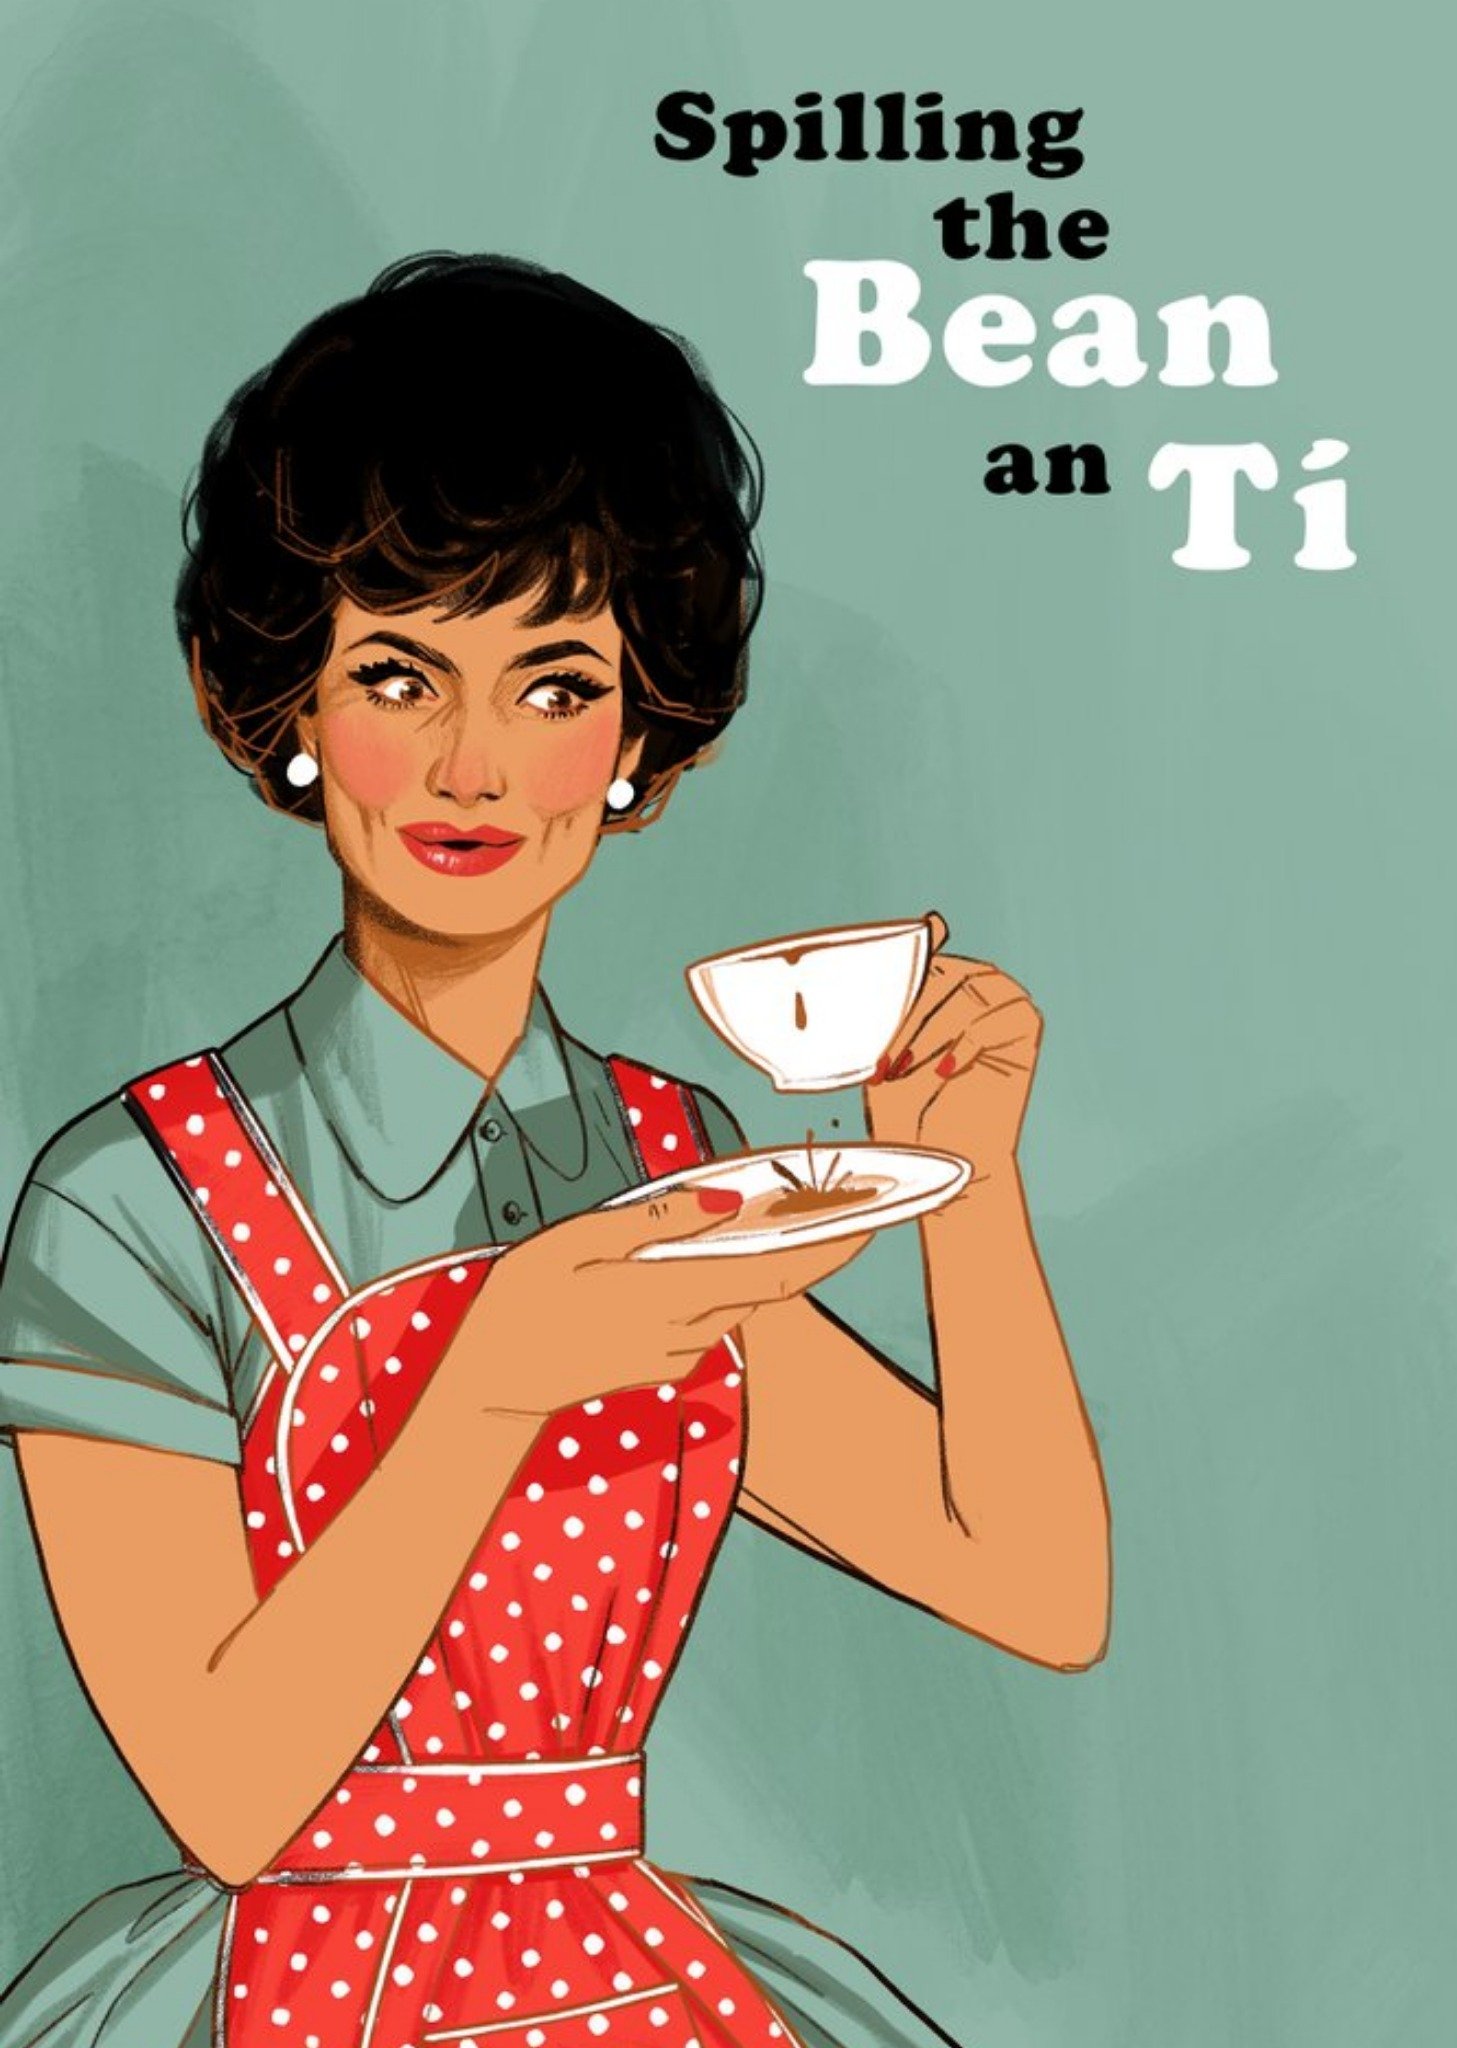 Moonpig Vintage Illustrated Woman In Apron Spilling The Bean An Ti Card Ecard